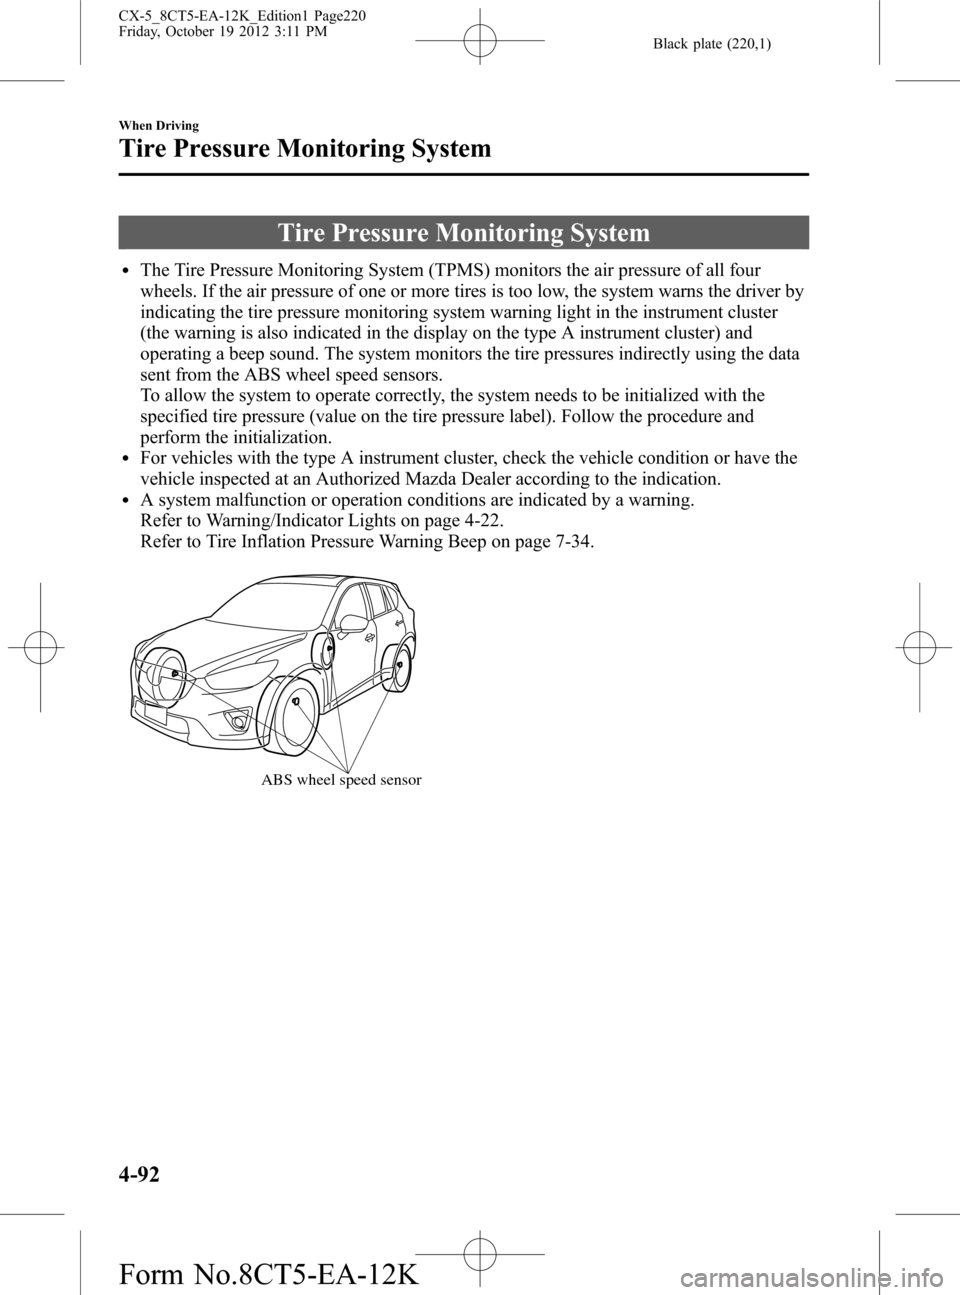 MAZDA MODEL CX-5 2014  Owners Manual (in English) Black plate (220,1)
Tire Pressure Monitoring System
lThe Tire Pressure Monitoring System (TPMS) monitors the air pressure of all four
wheels. If the air pressure of one or more tires is too low, the s